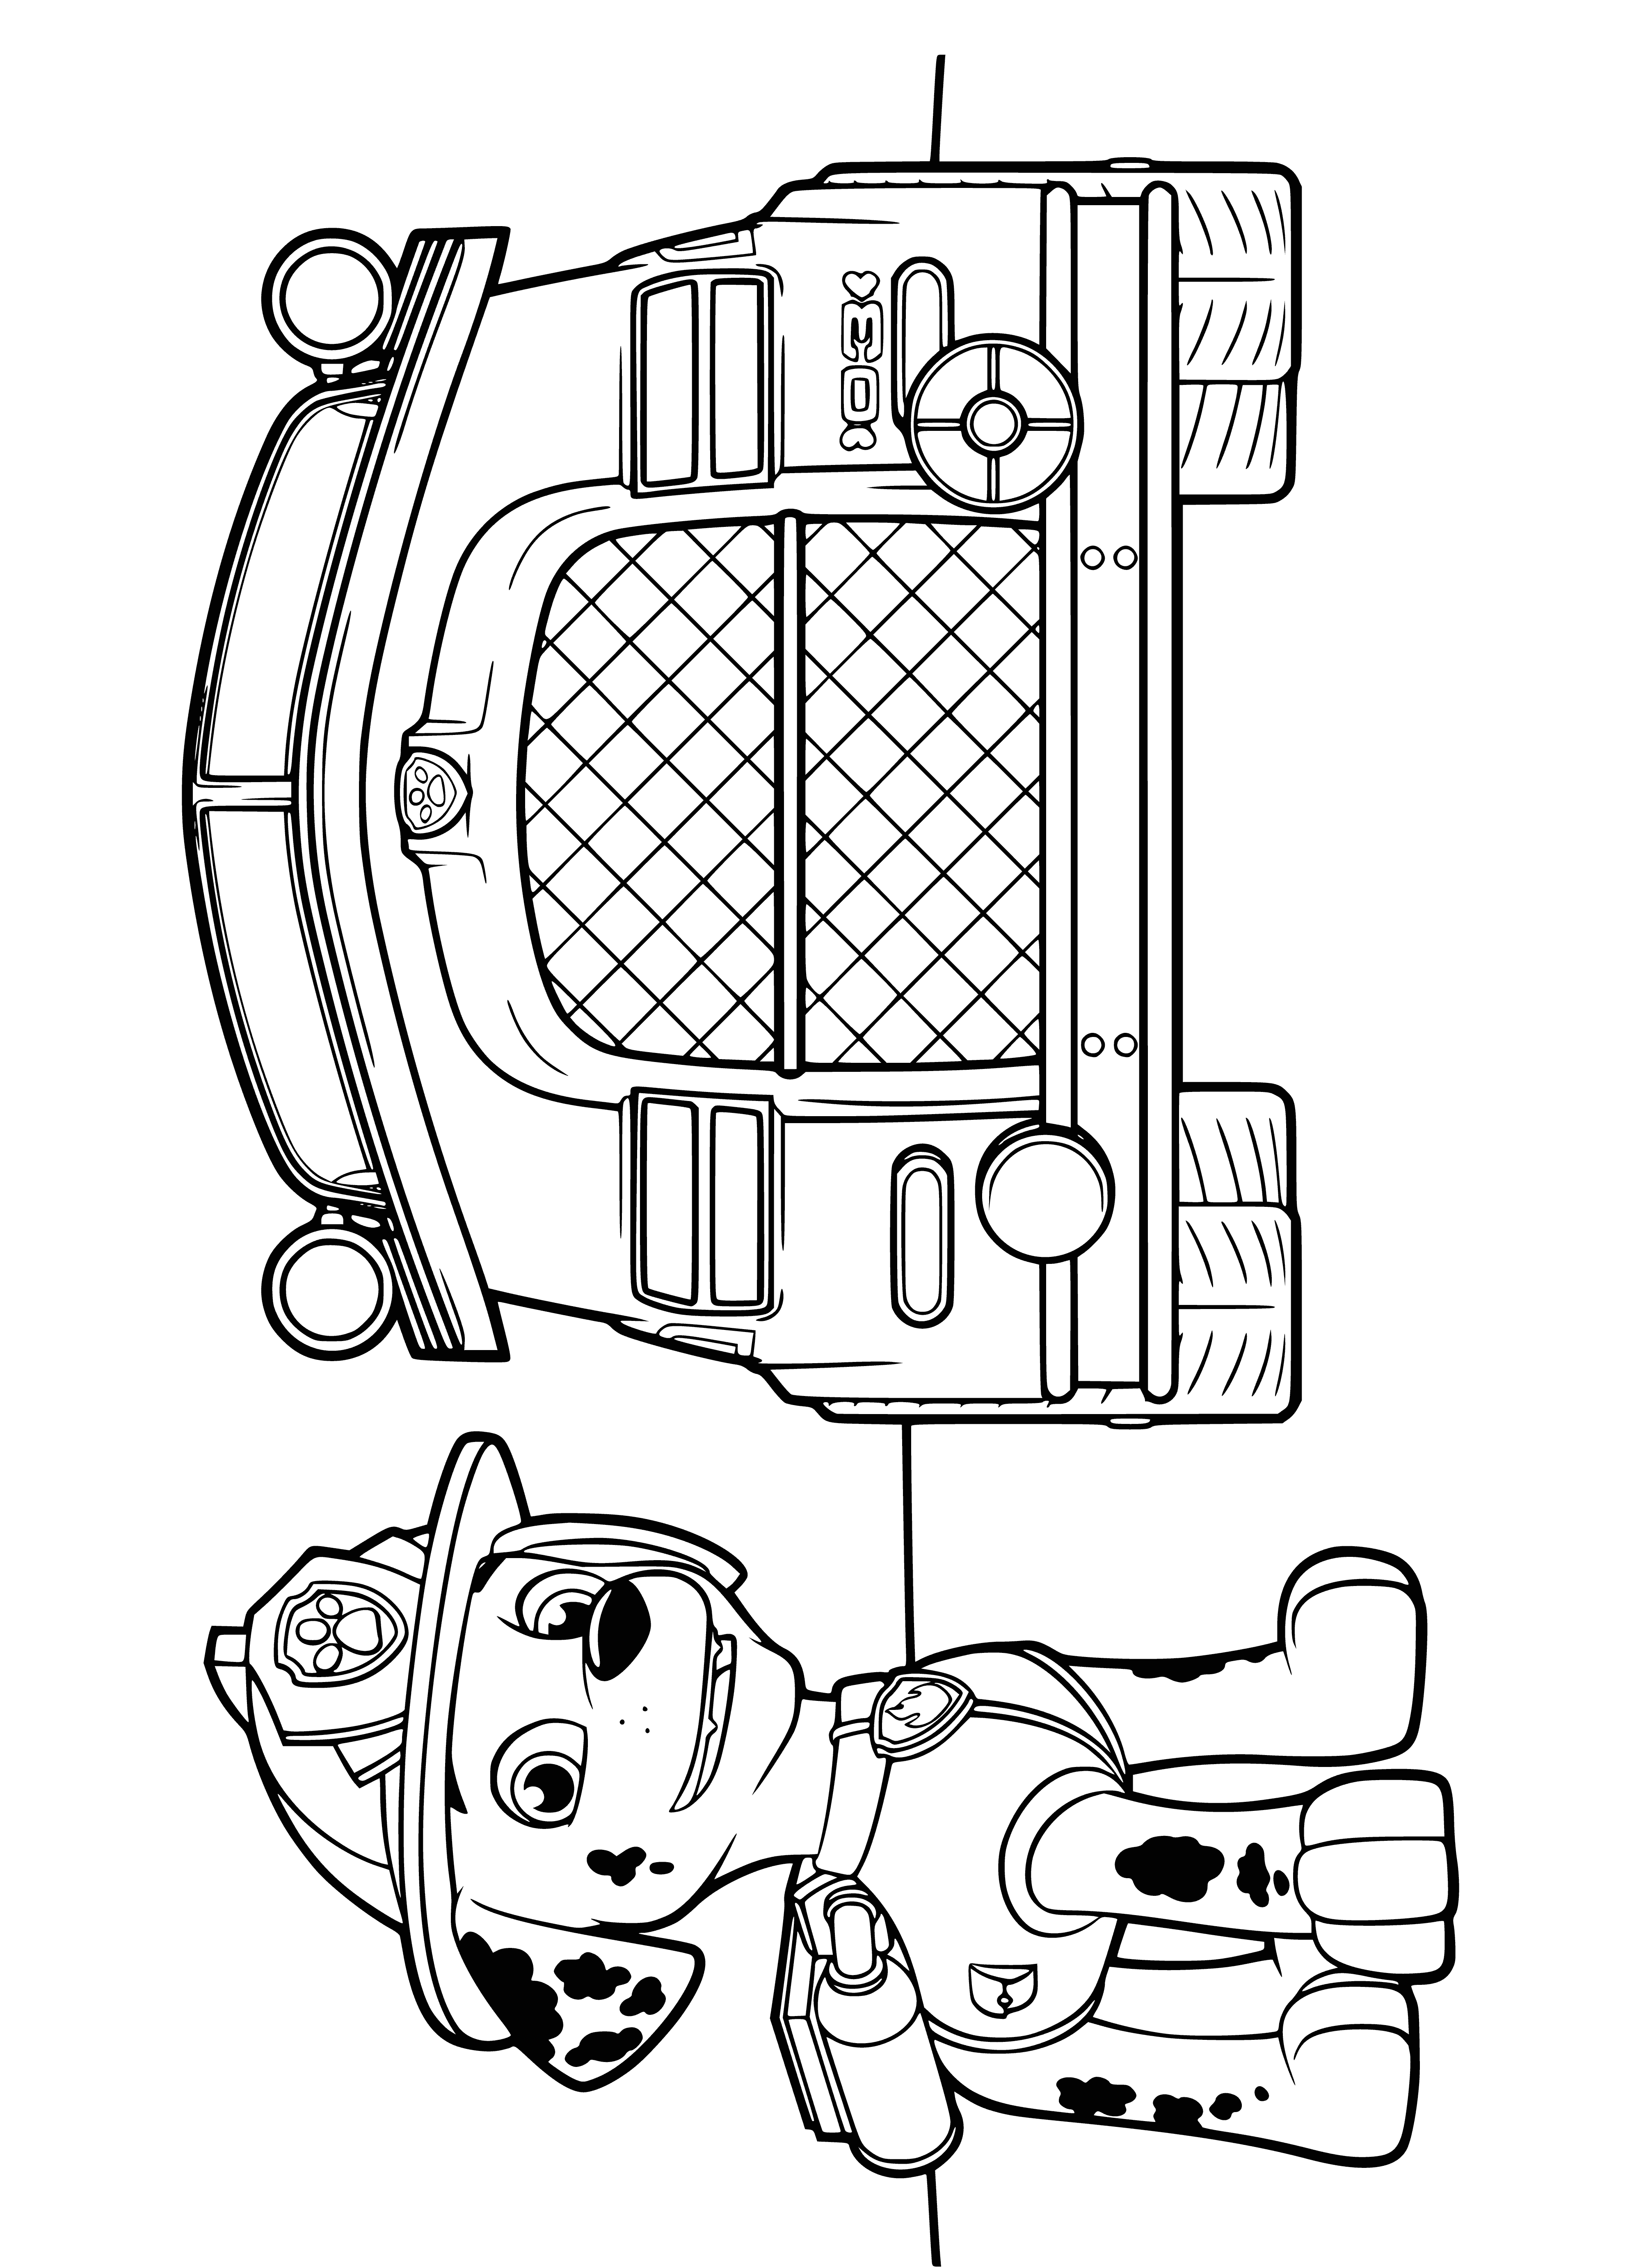 Marshal and fire truck coloring page